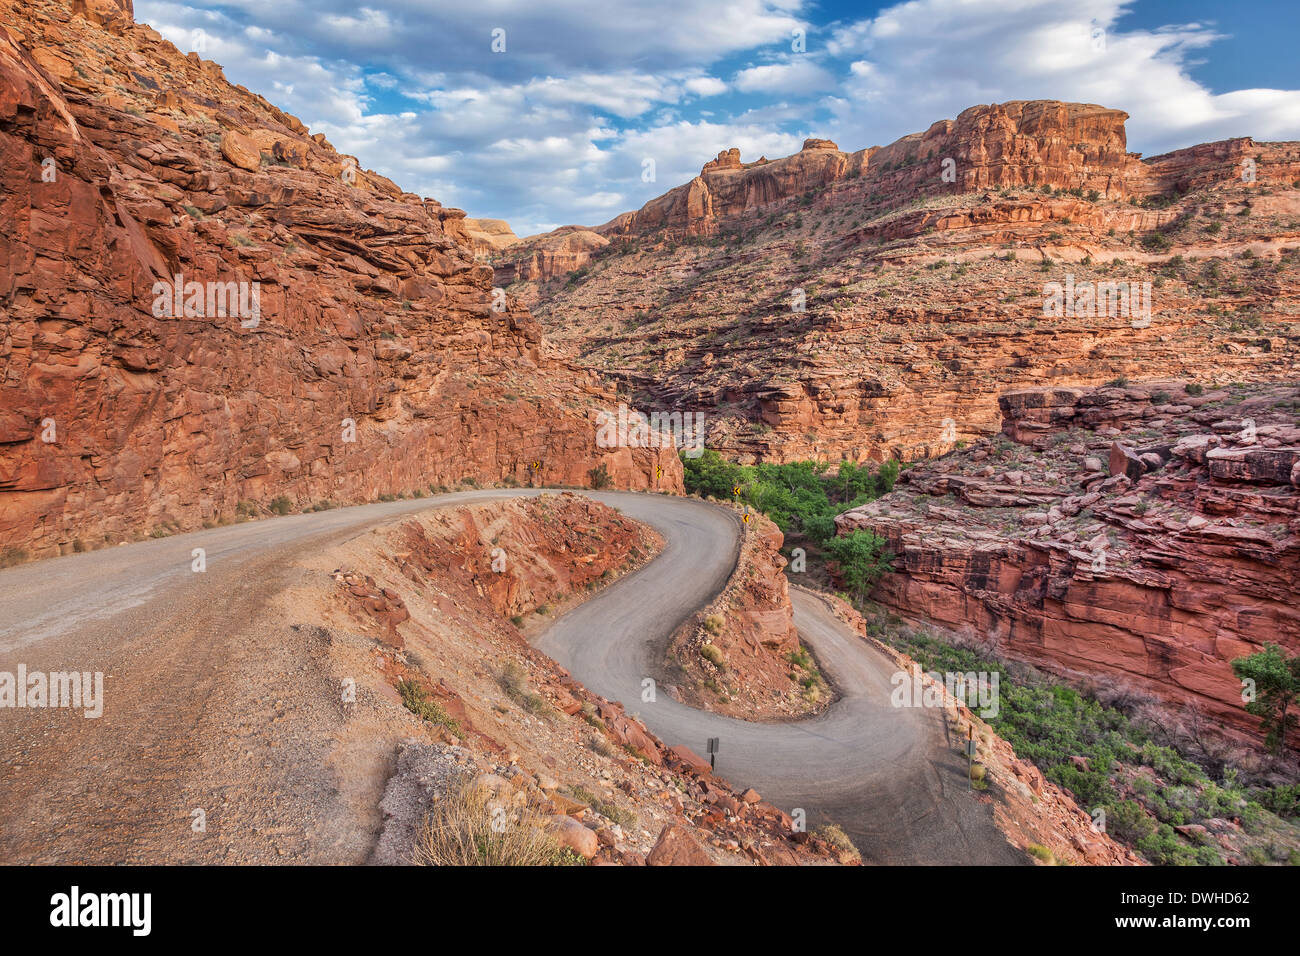 windy road in Canyonlands near Moab, Utah, descending into a canyon Stock Photo